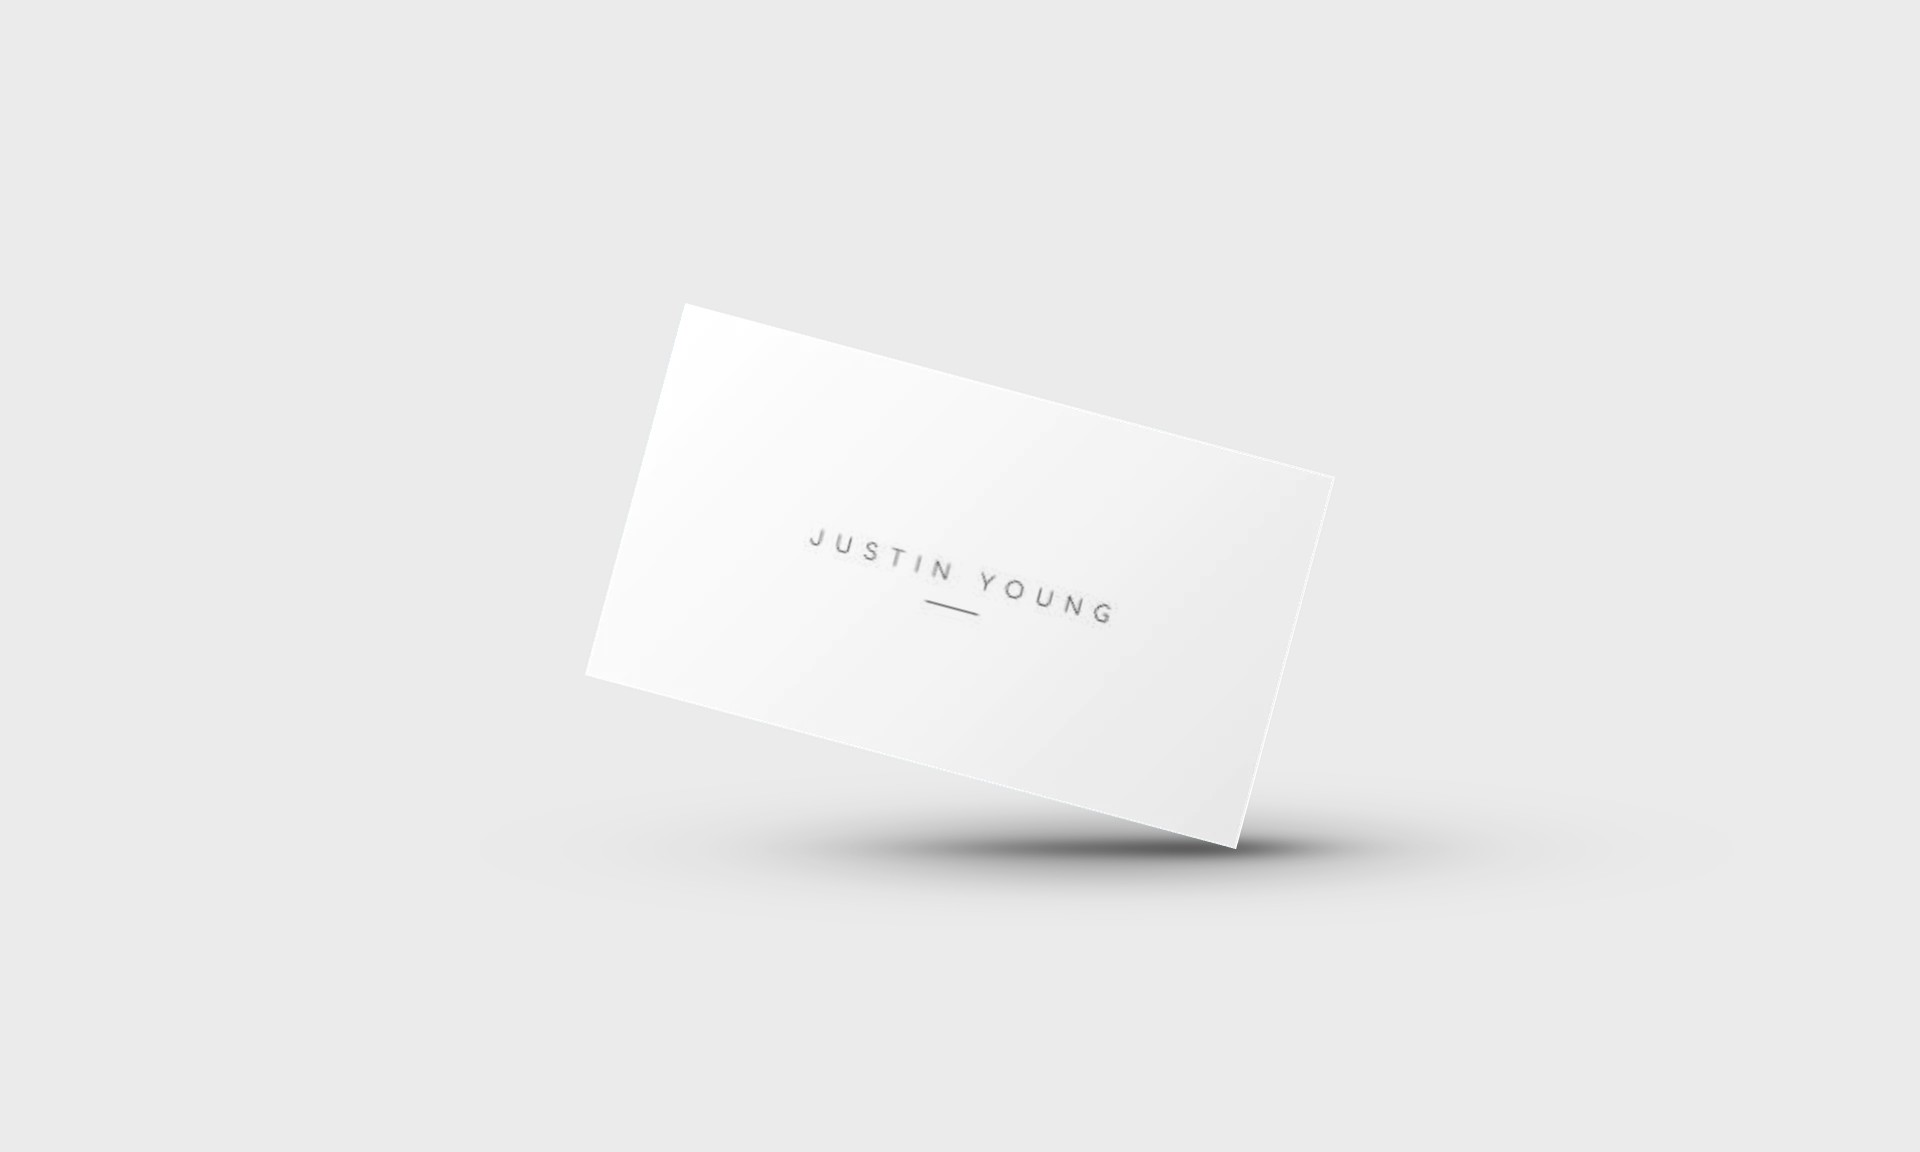 JUSTIN YOUNG GOOGLE DOCS BUSINESS CARD TEMPLATE STAND OUT SHOP